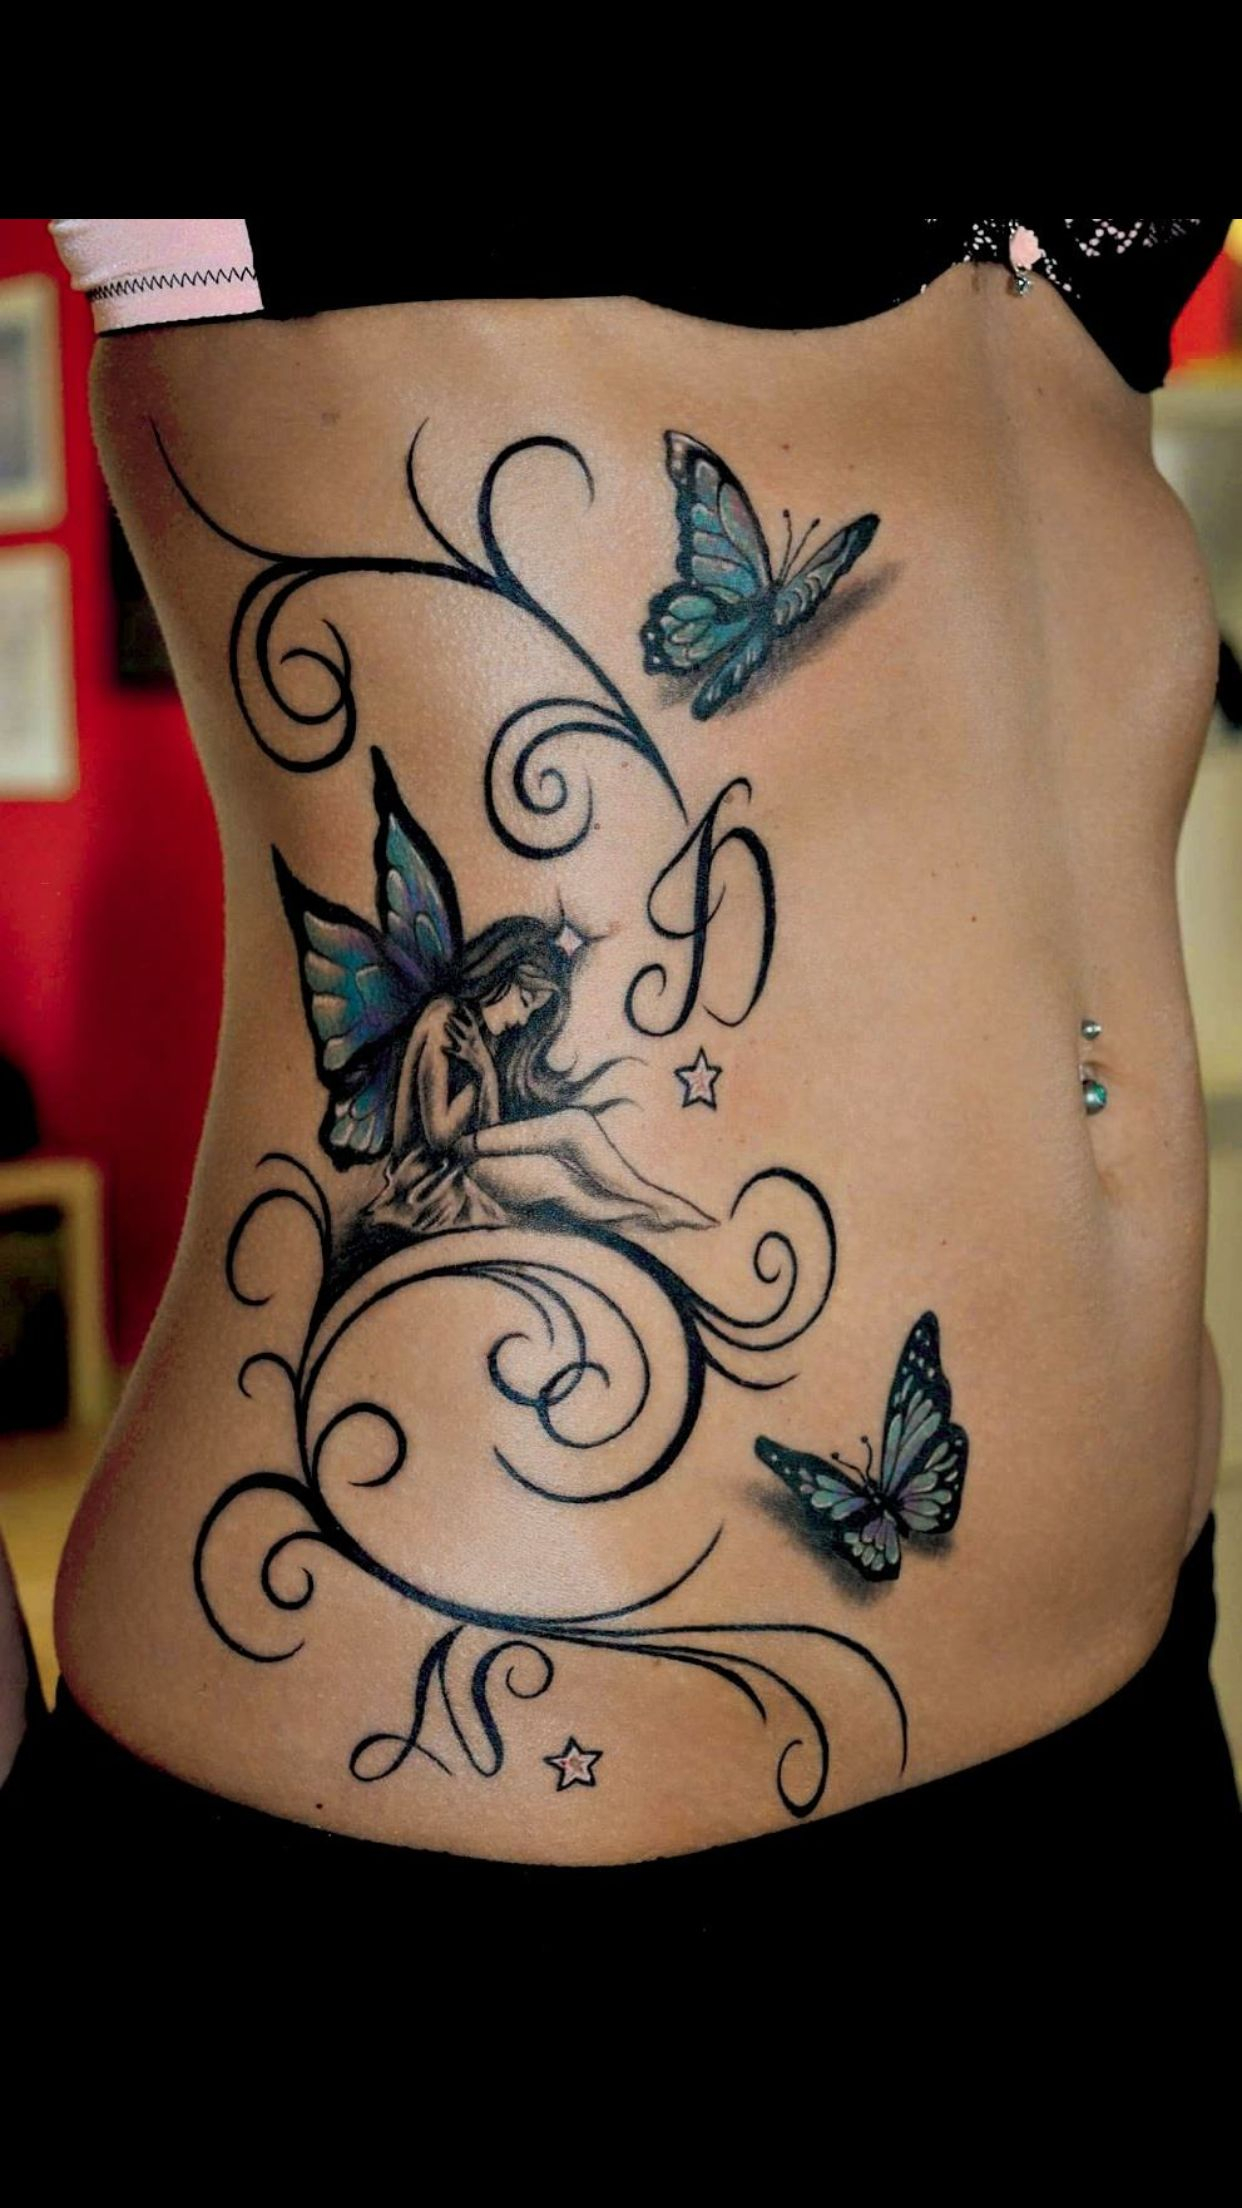 Butterflies Tattoo This Would Be My Top Three Next Tattoo When I within dimensions 1242 X 2208